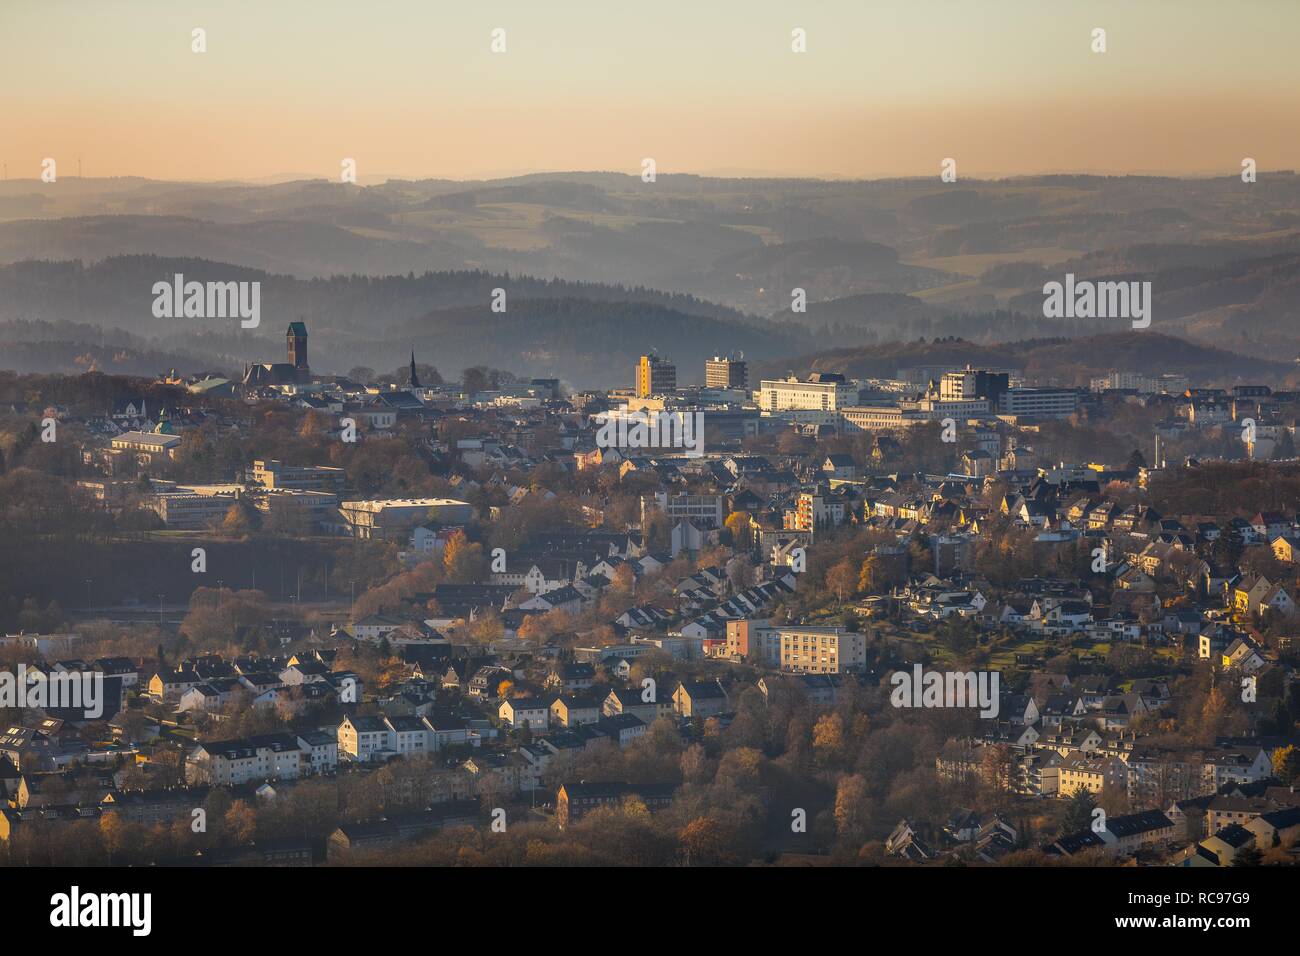 Aerial view, city view with catholic church St. Joseph and Medardus, hilly landscape at the back, Lüdenscheid, Sauerland Stock Photo